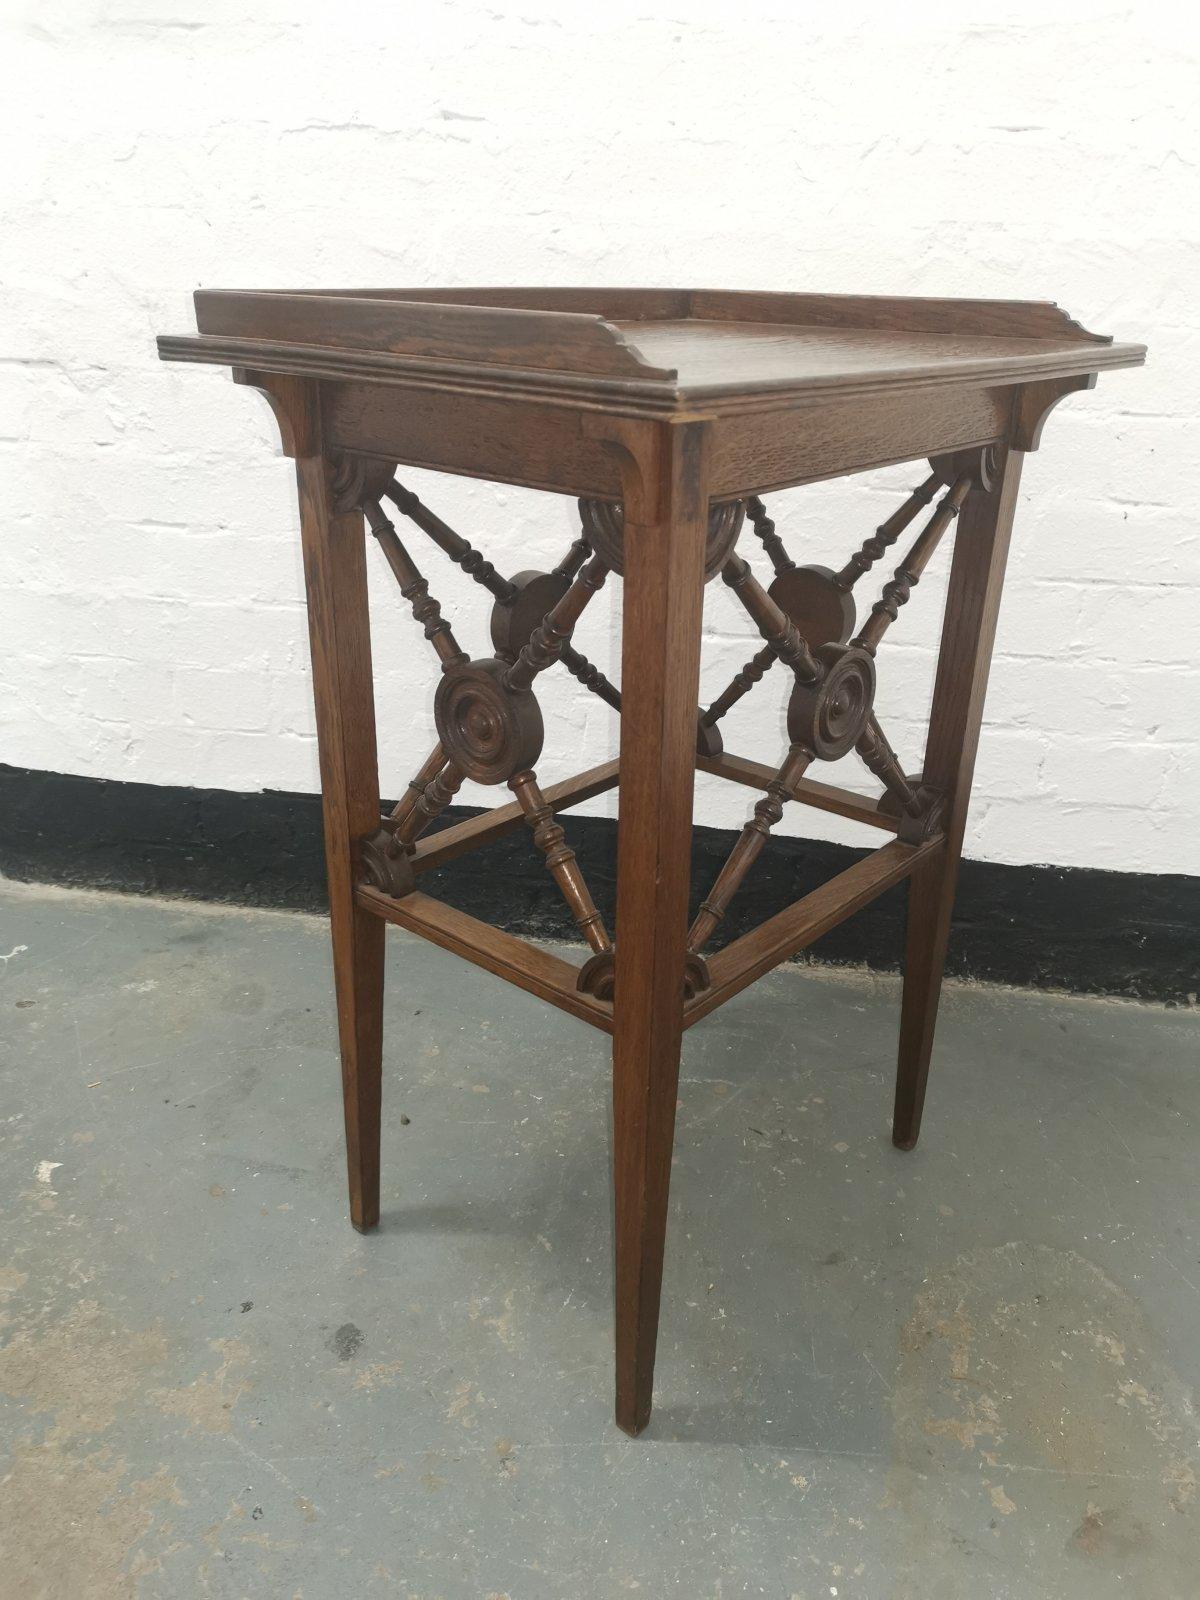 19th Century Jas Shoolbred Aesthetic Movement Oak Side Table With Cross Turned & Disc Details For Sale